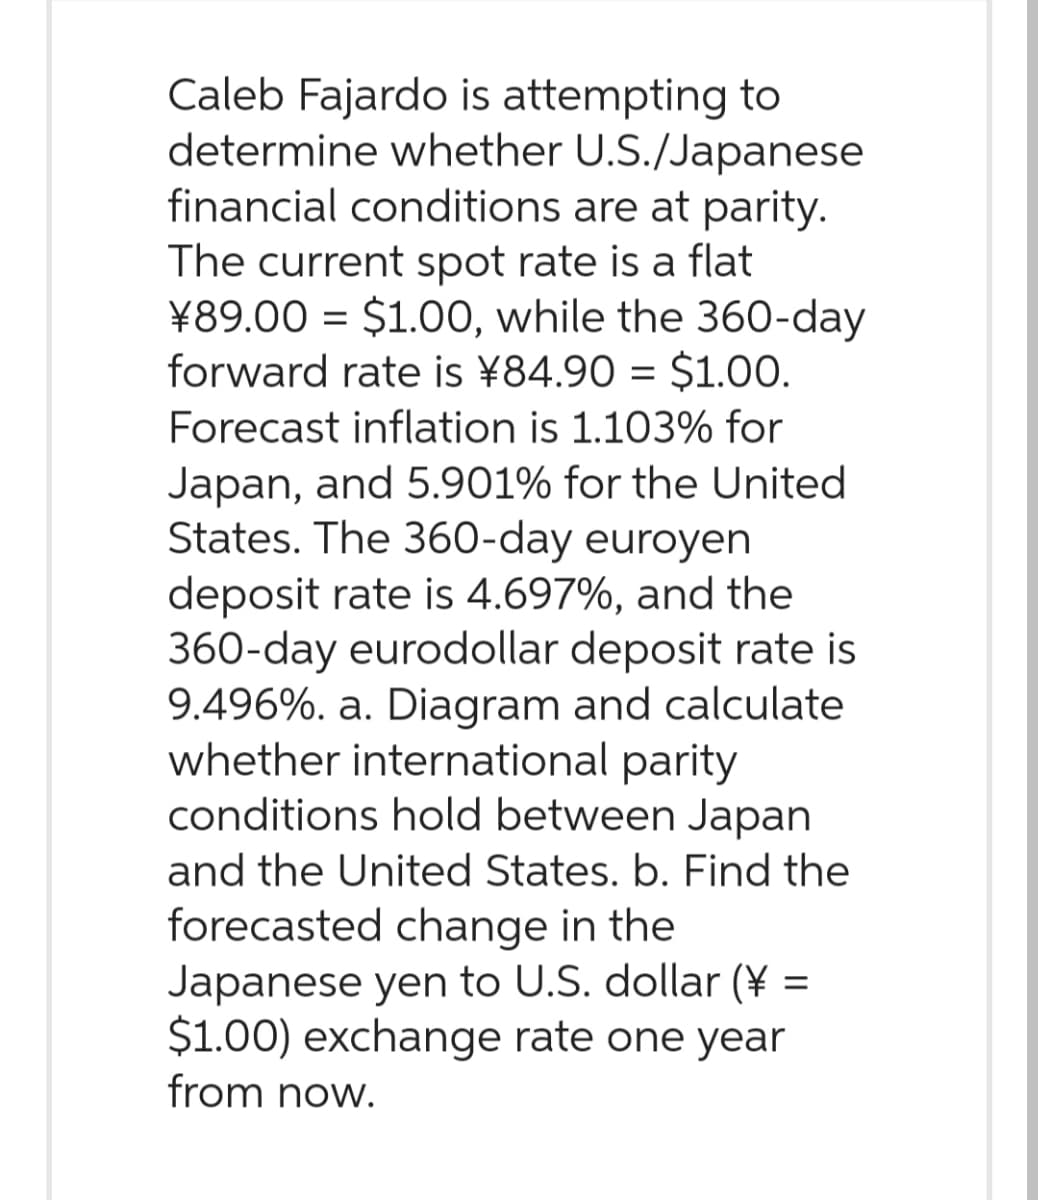 Caleb Fajardo is attempting to
determine whether U.S./Japanese
financial conditions are at parity.
The current spot rate is a flat
¥89.00 = $1.00, while the 360-day
forward rate is ¥84.90 = $1.00.
Forecast inflation is 1.103% for
Japan, and 5.901% for the United
States. The 360-day euroyen
deposit rate is 4.697%, and the
360-day eurodollar deposit rate is
9.496%. a. Diagram and calculate
whether international parity
conditions hold between Japan
and the United States. b. Find the
forecasted change in the
Japanese yen to U.S. dollar (¥ =
$1.00) exchange rate one year
from now.